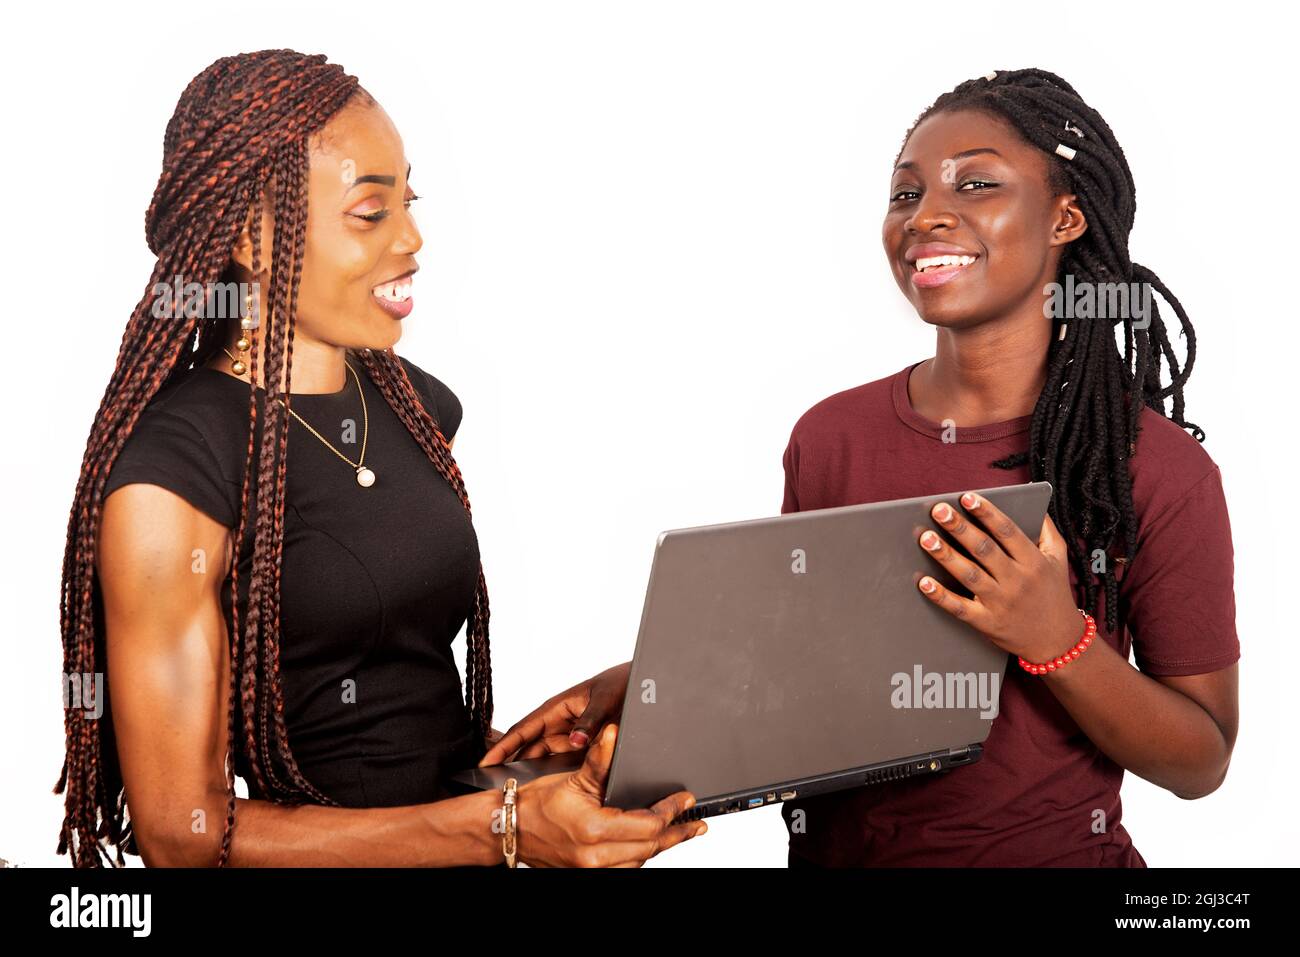 two smiling beautiful sisters standing in burgundy black and red colors holding and using a laptop Stock Photo